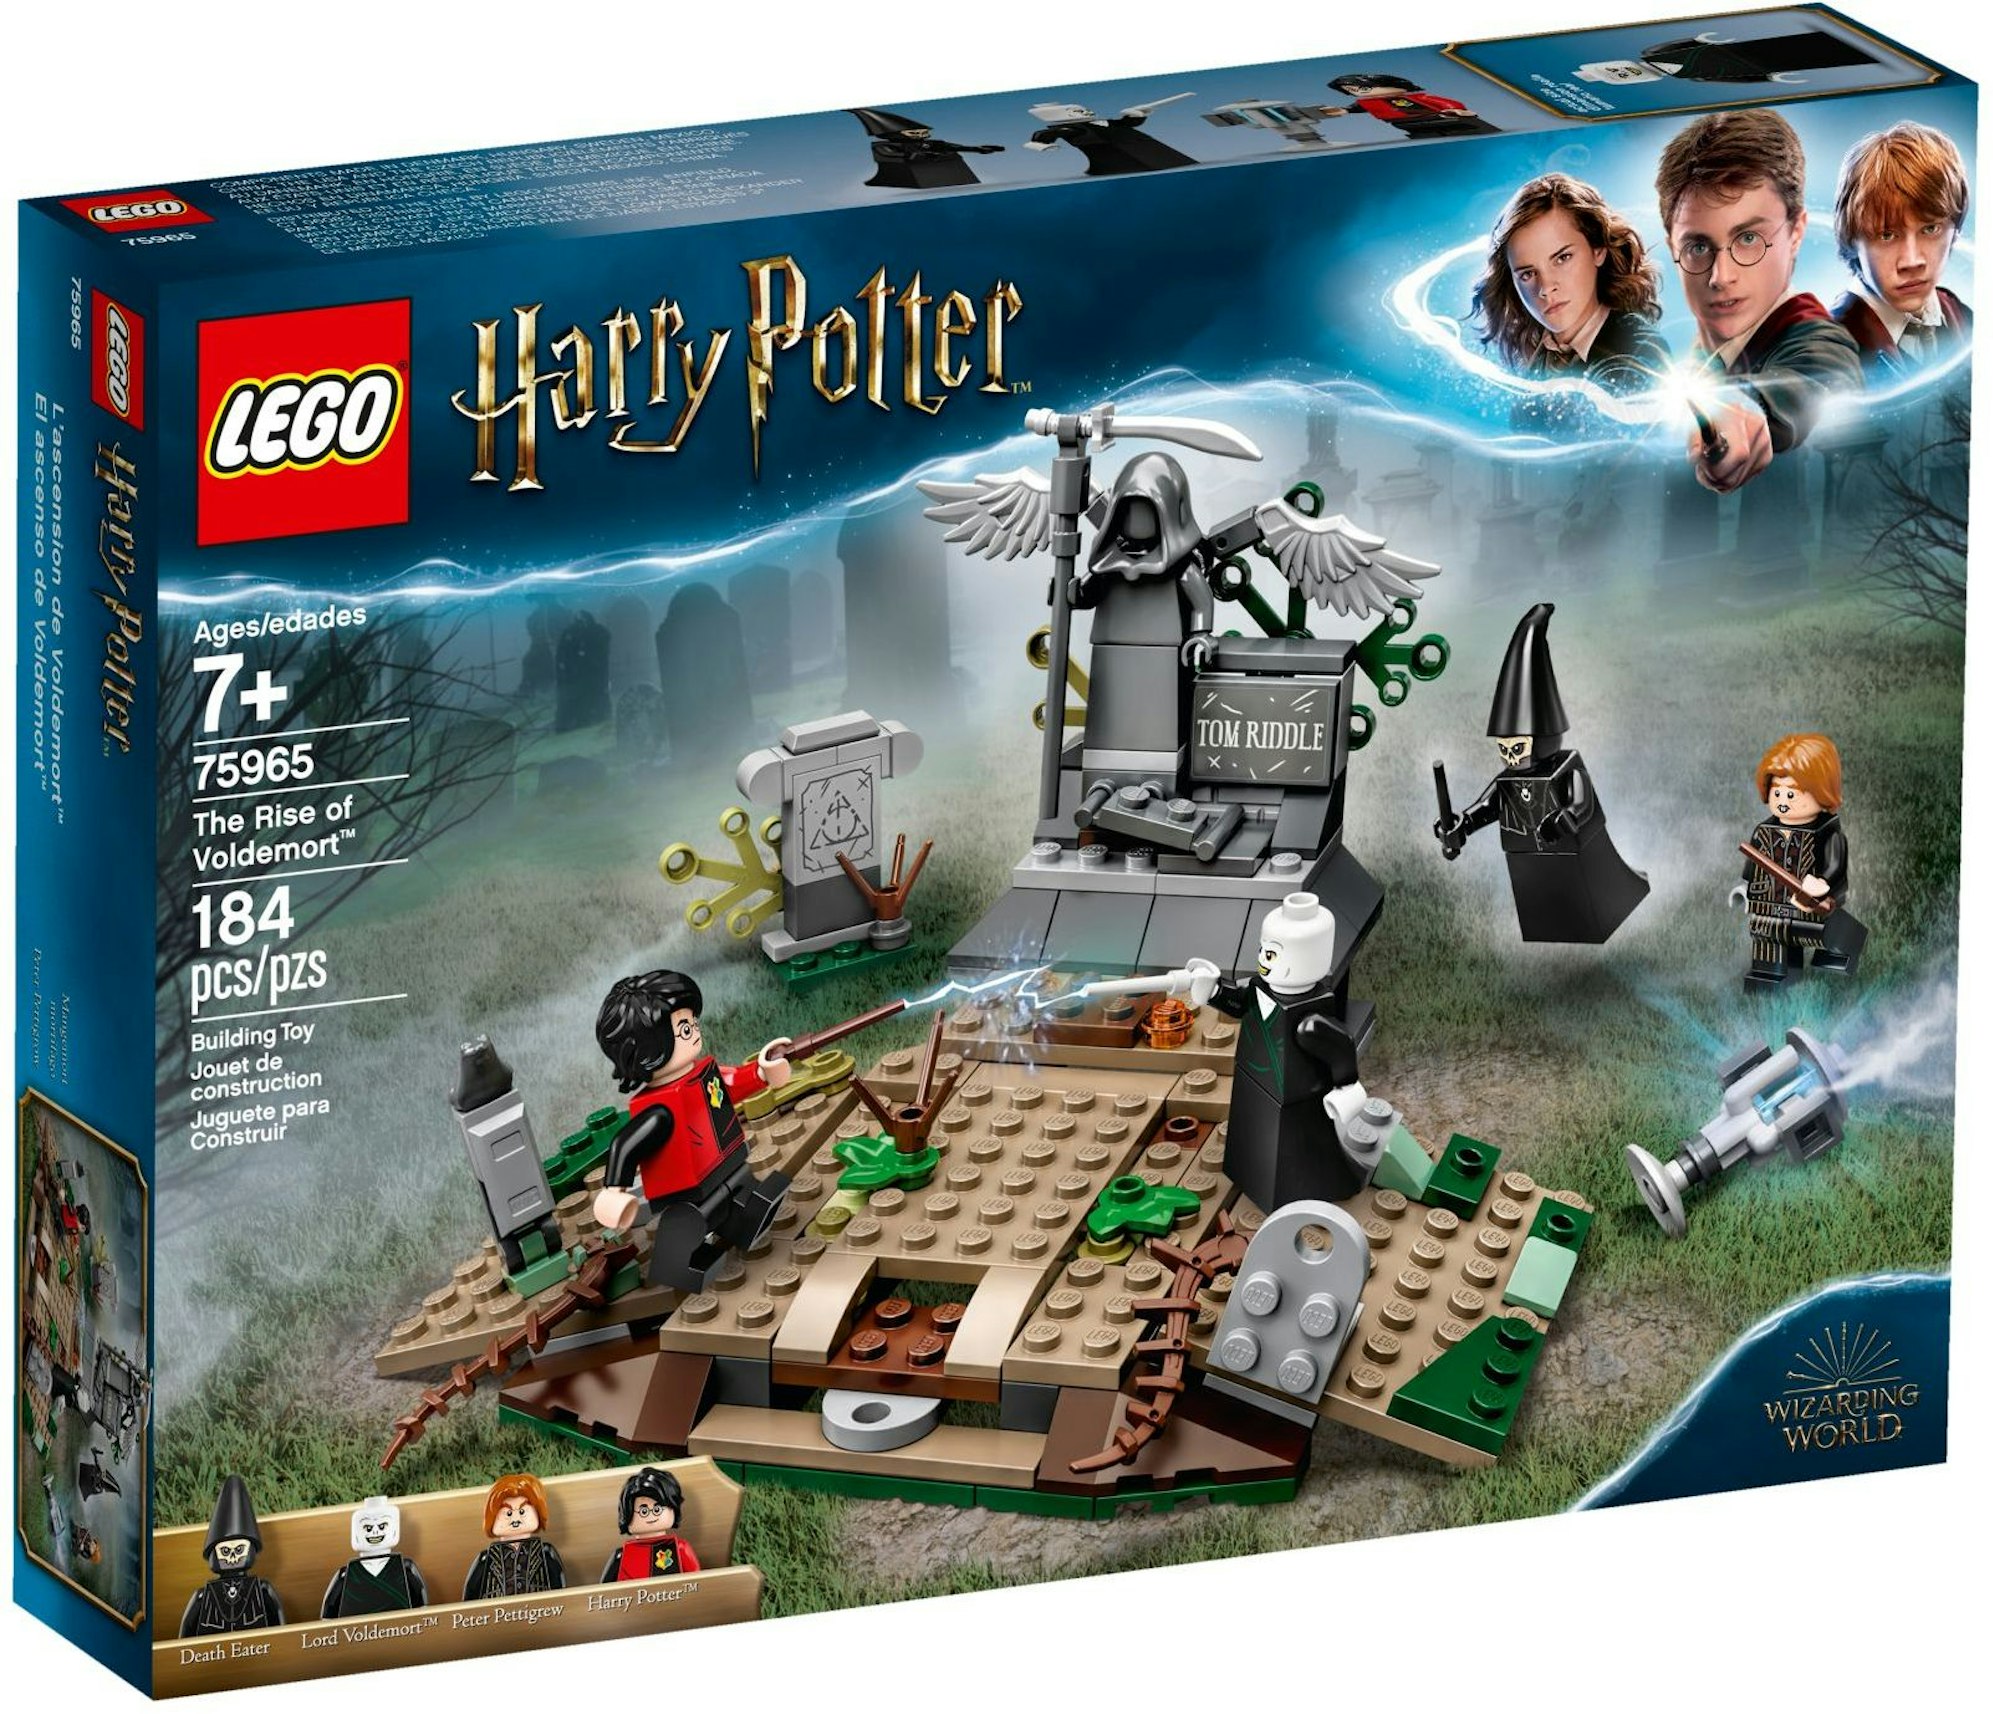 LEGO Potter and Goblet of Fire The Rise of Voldemort Set 75965 - JP